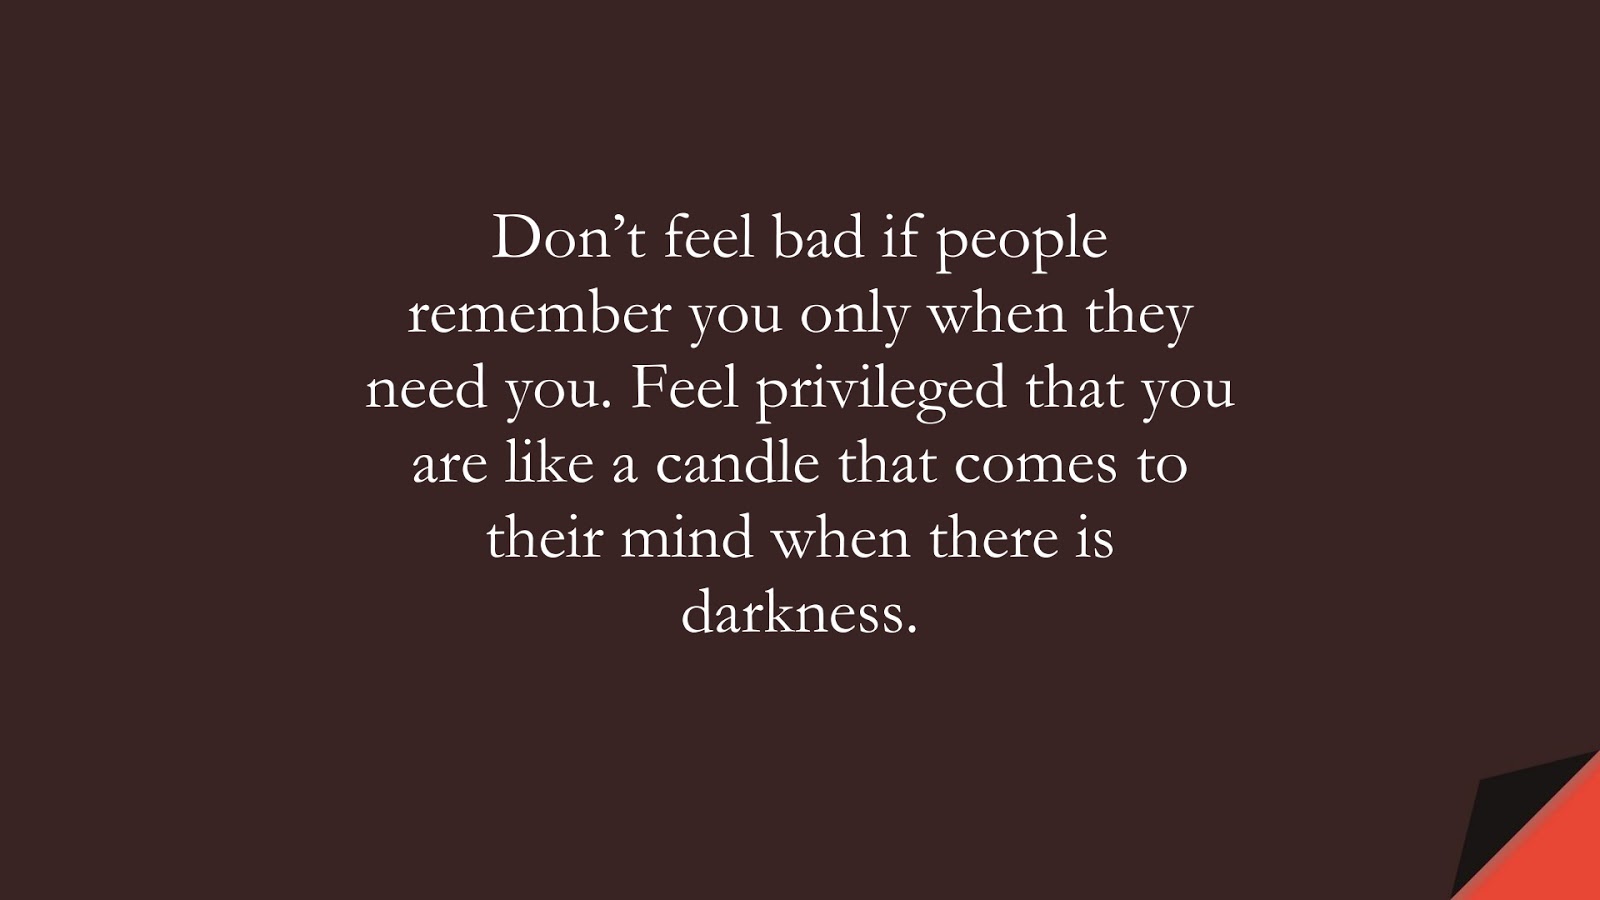 Don’t feel bad if people remember you only when they need you. Feel privileged that you are like a candle that comes to their mind when there is darkness.FALSE